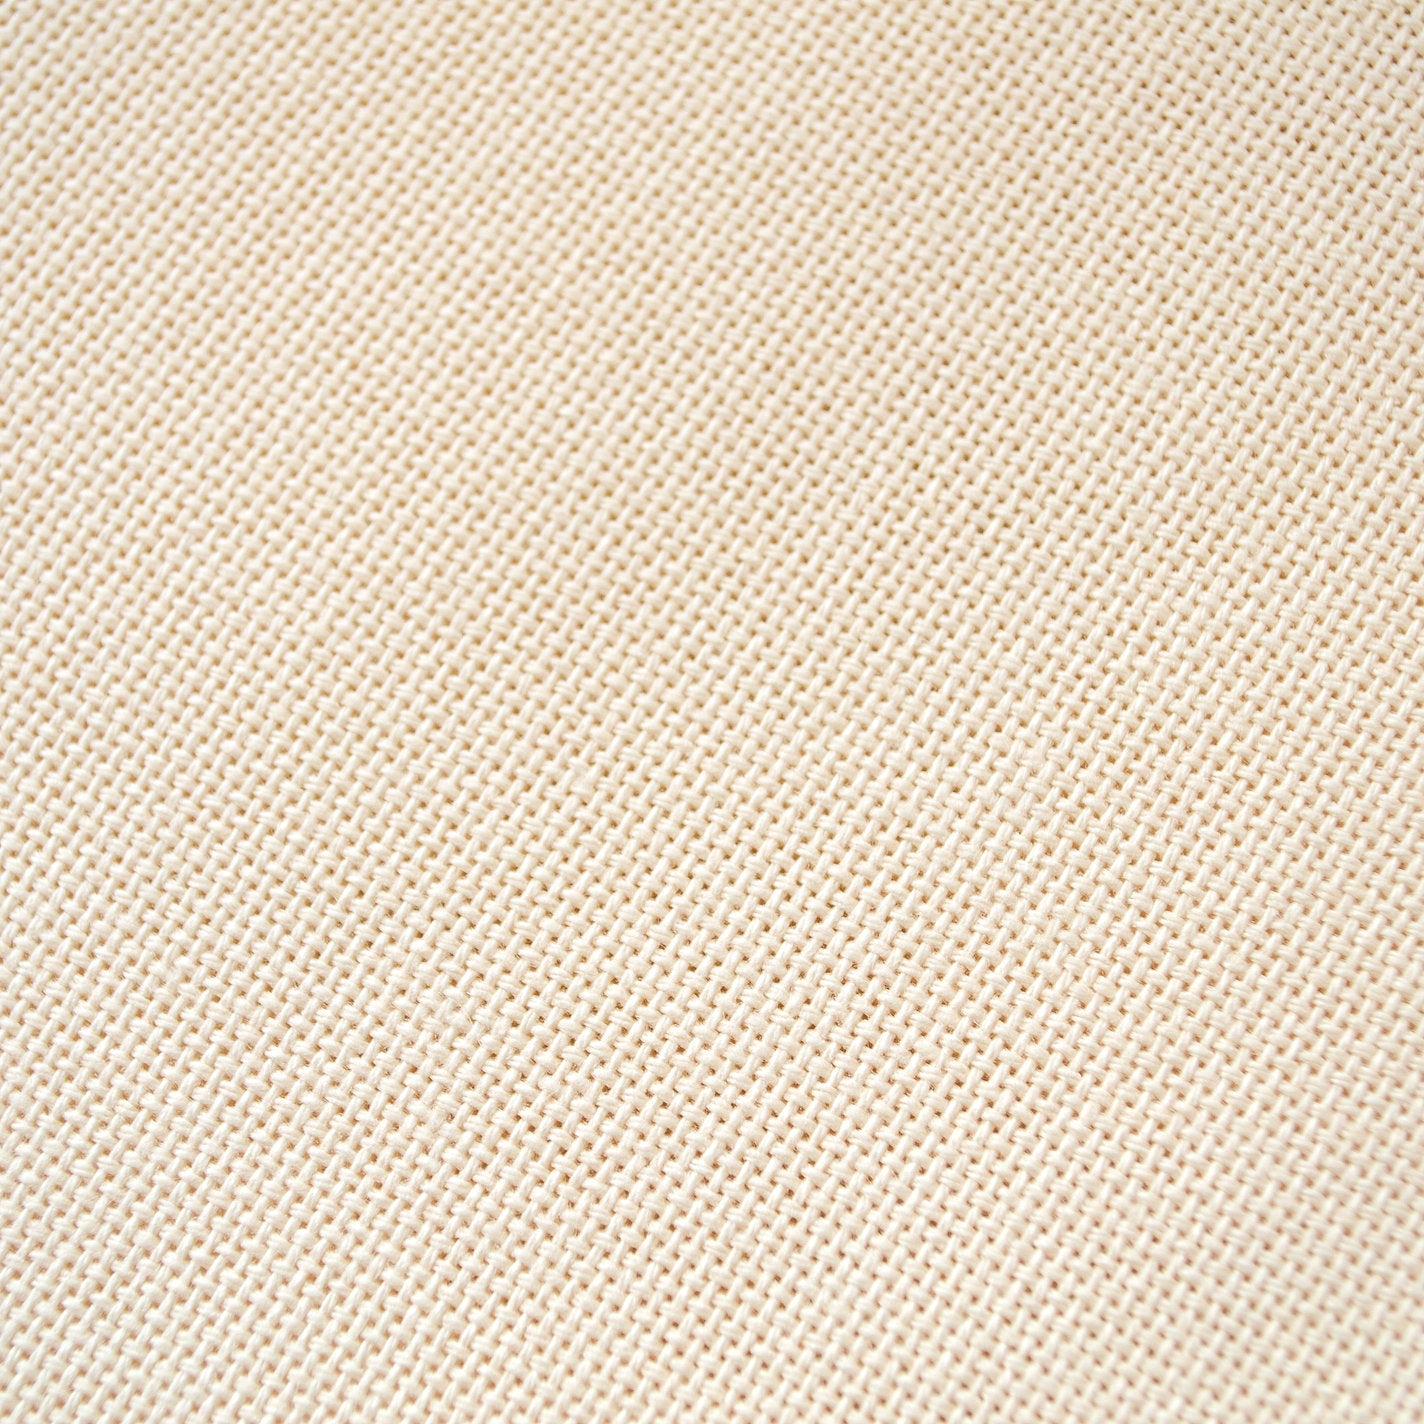 Lugana fabric 25 ct. for Cross Stitch in Ivory Color 264 by Zweigart